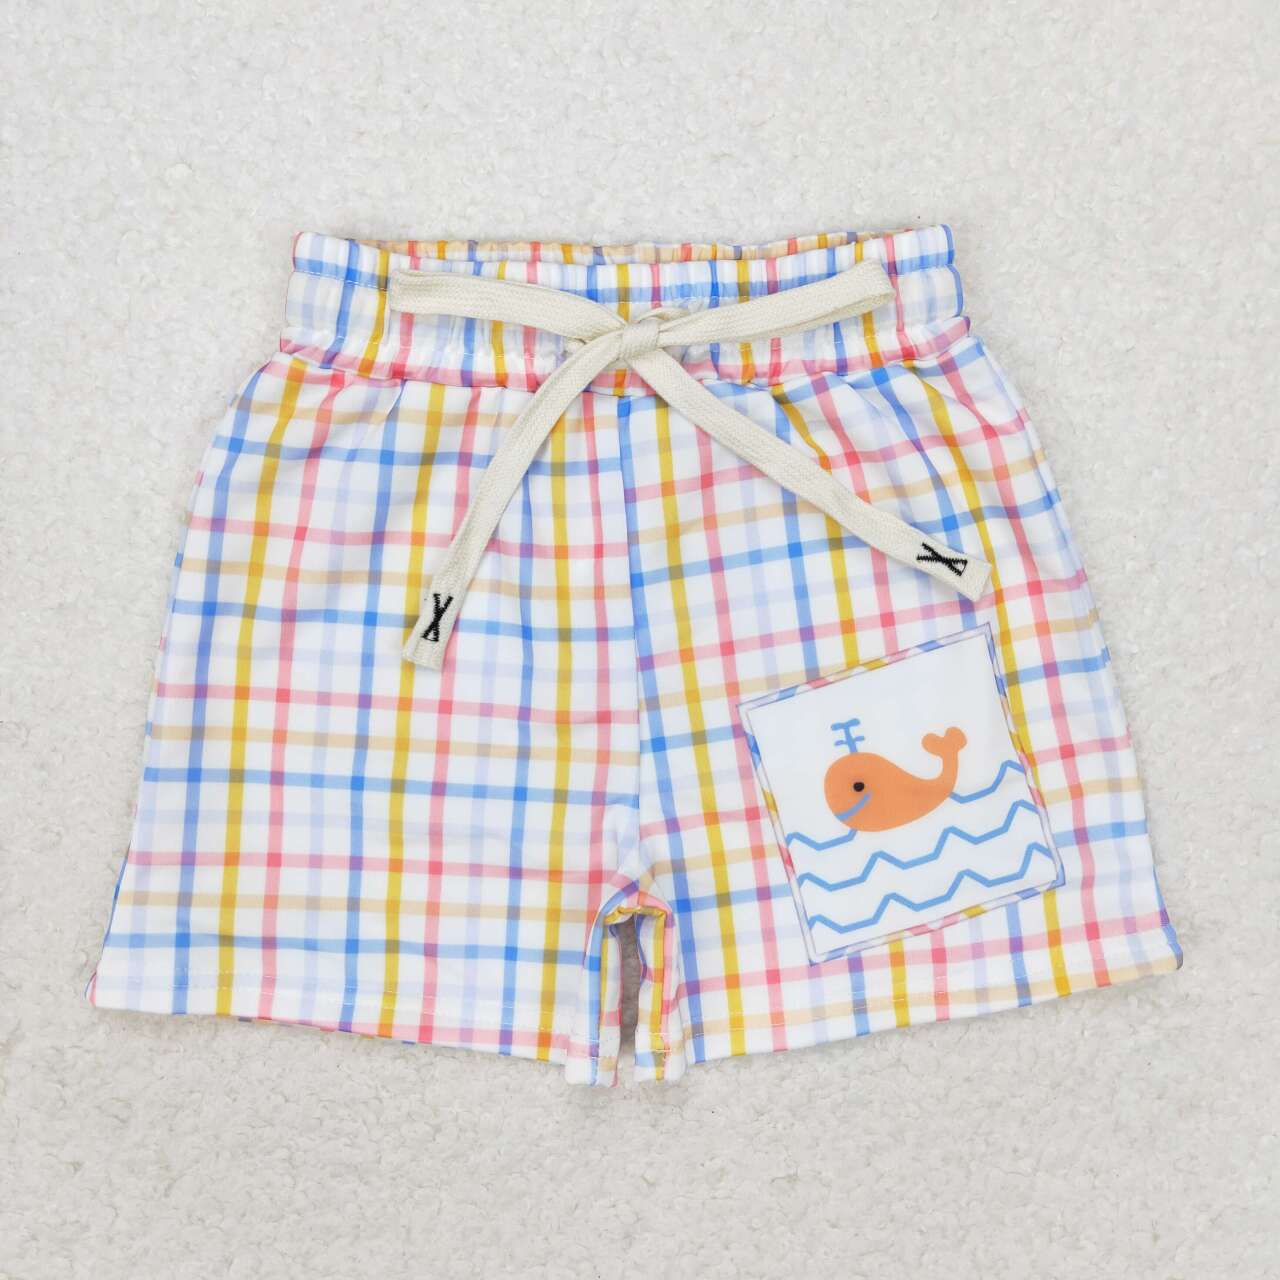 Whale Plaid Print Sibling Matching Swimsuits